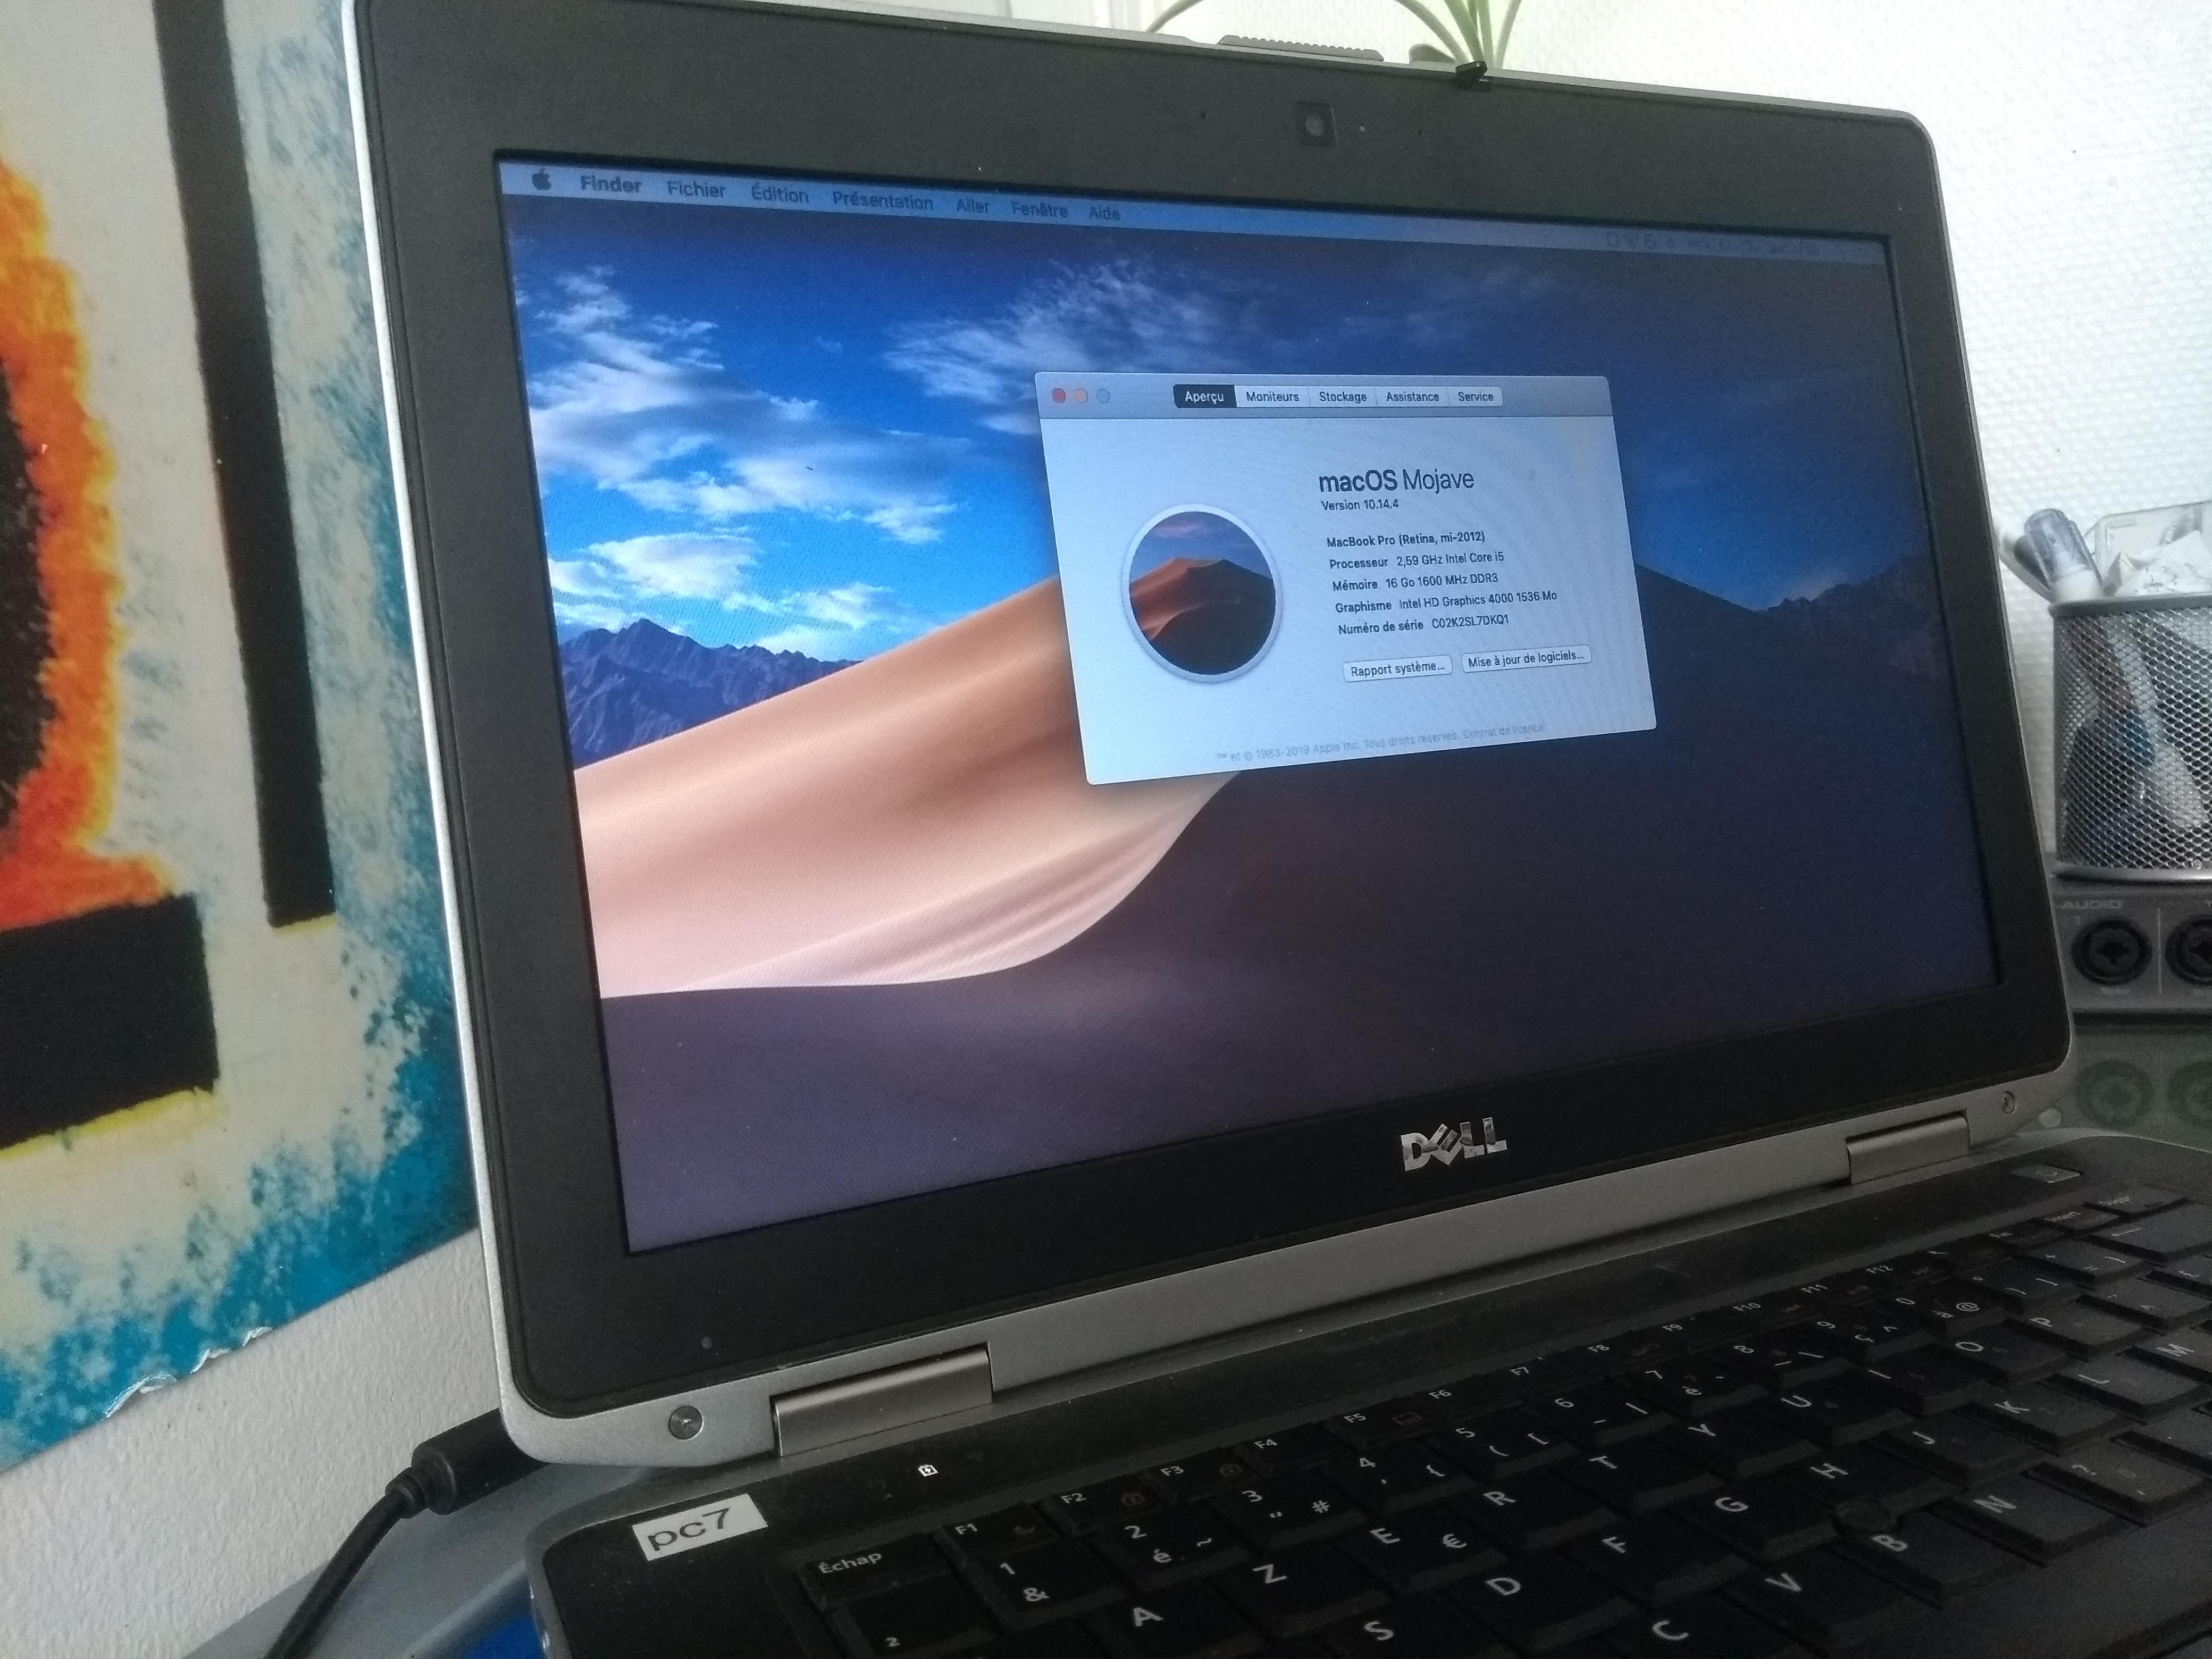 bootable usb for dell laptop on mac